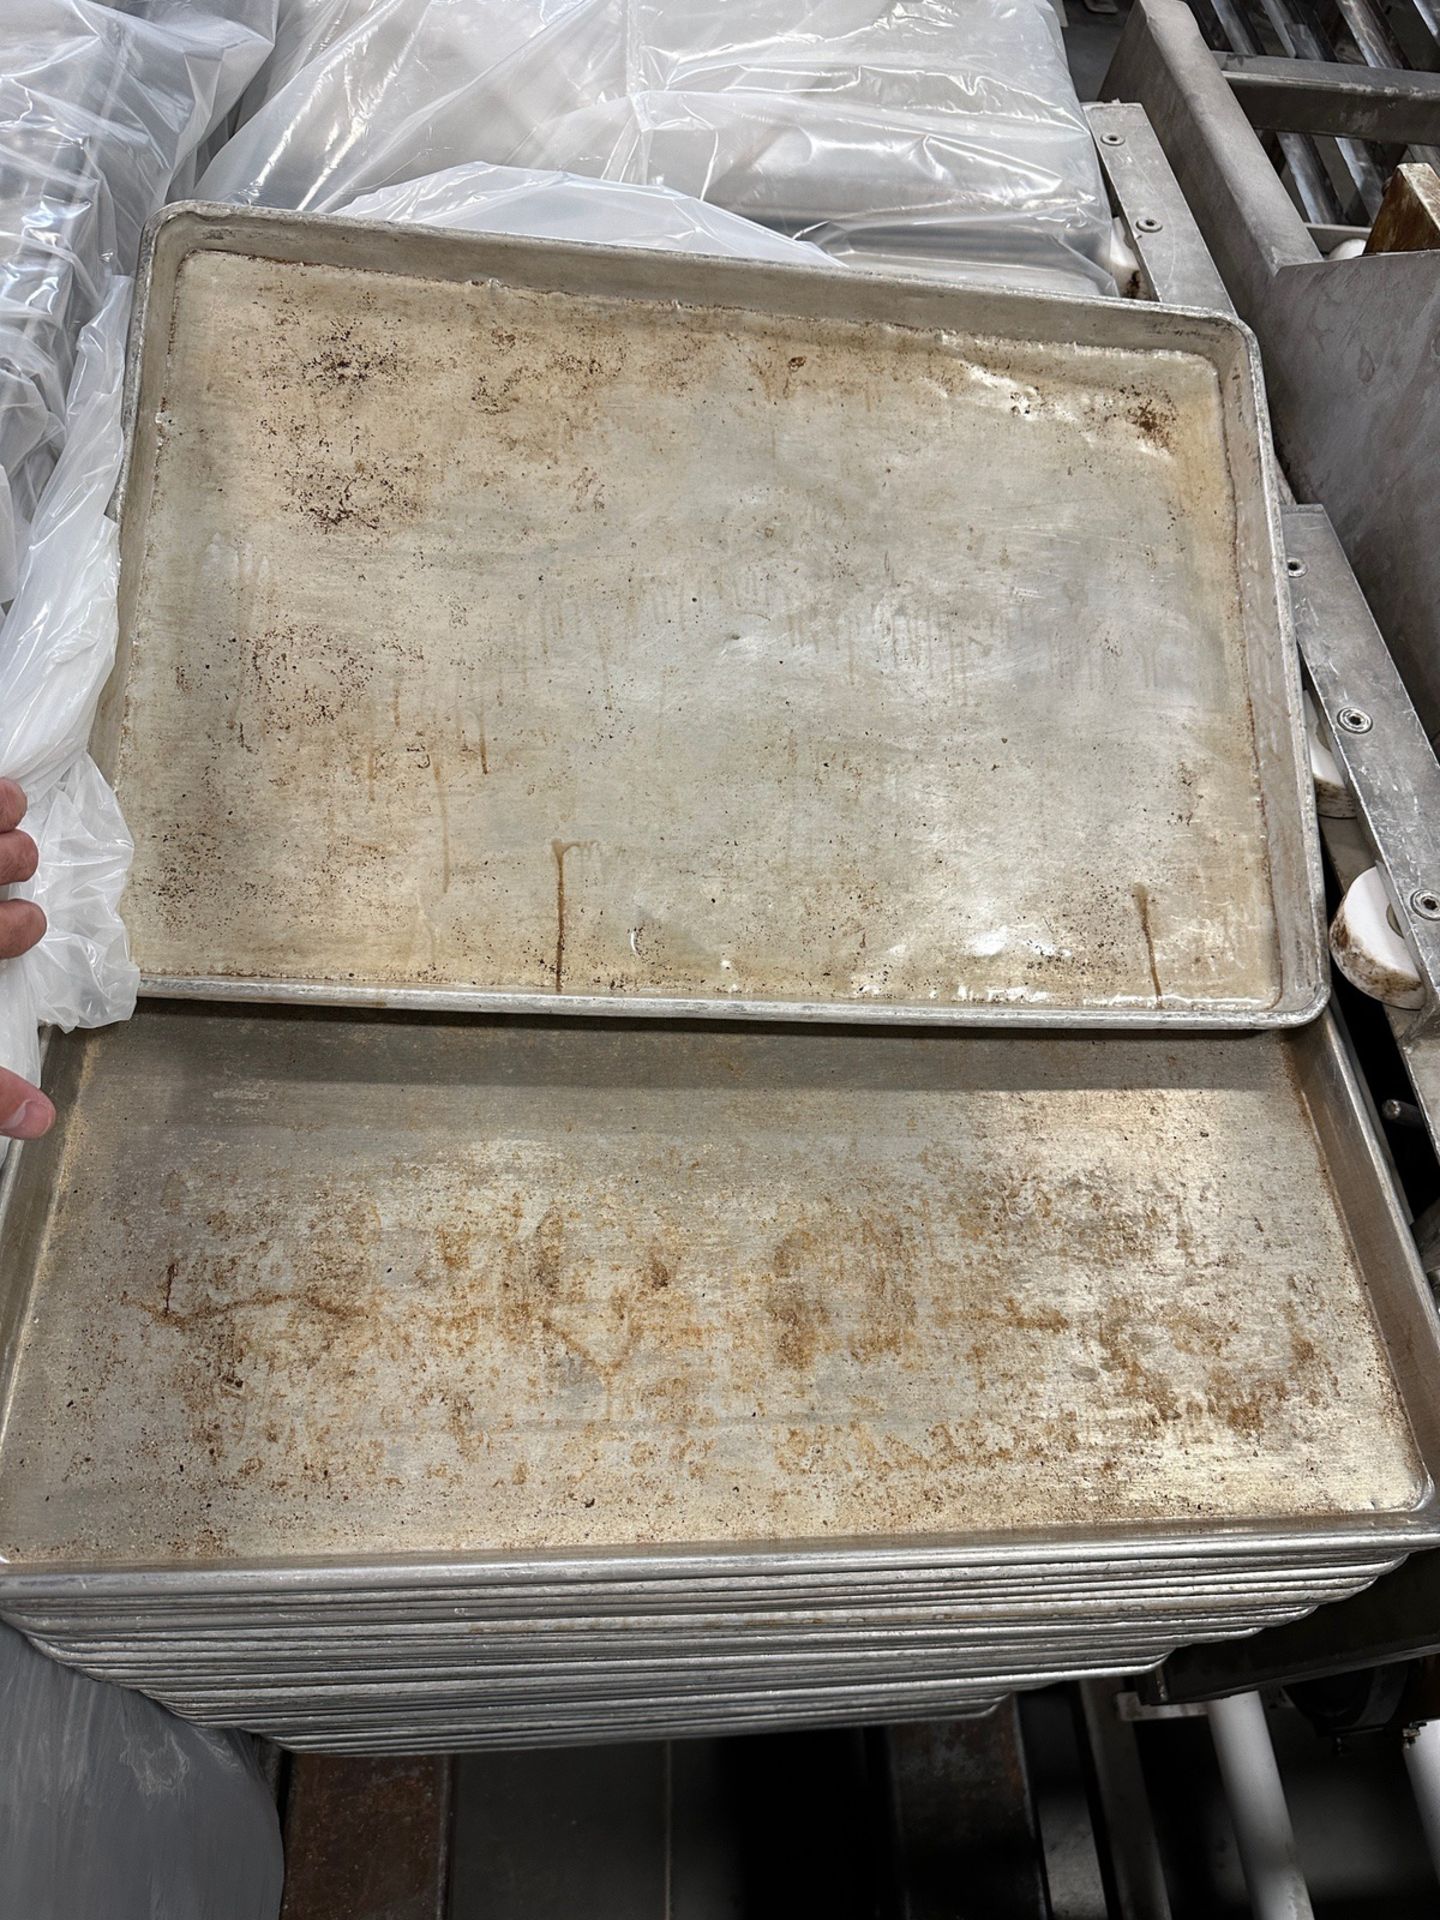 Approx. (300) Sheet Trays on Heavy Duty Pan Cart (Approx. 18" x 26") | Rig Fee $50 - Image 2 of 2